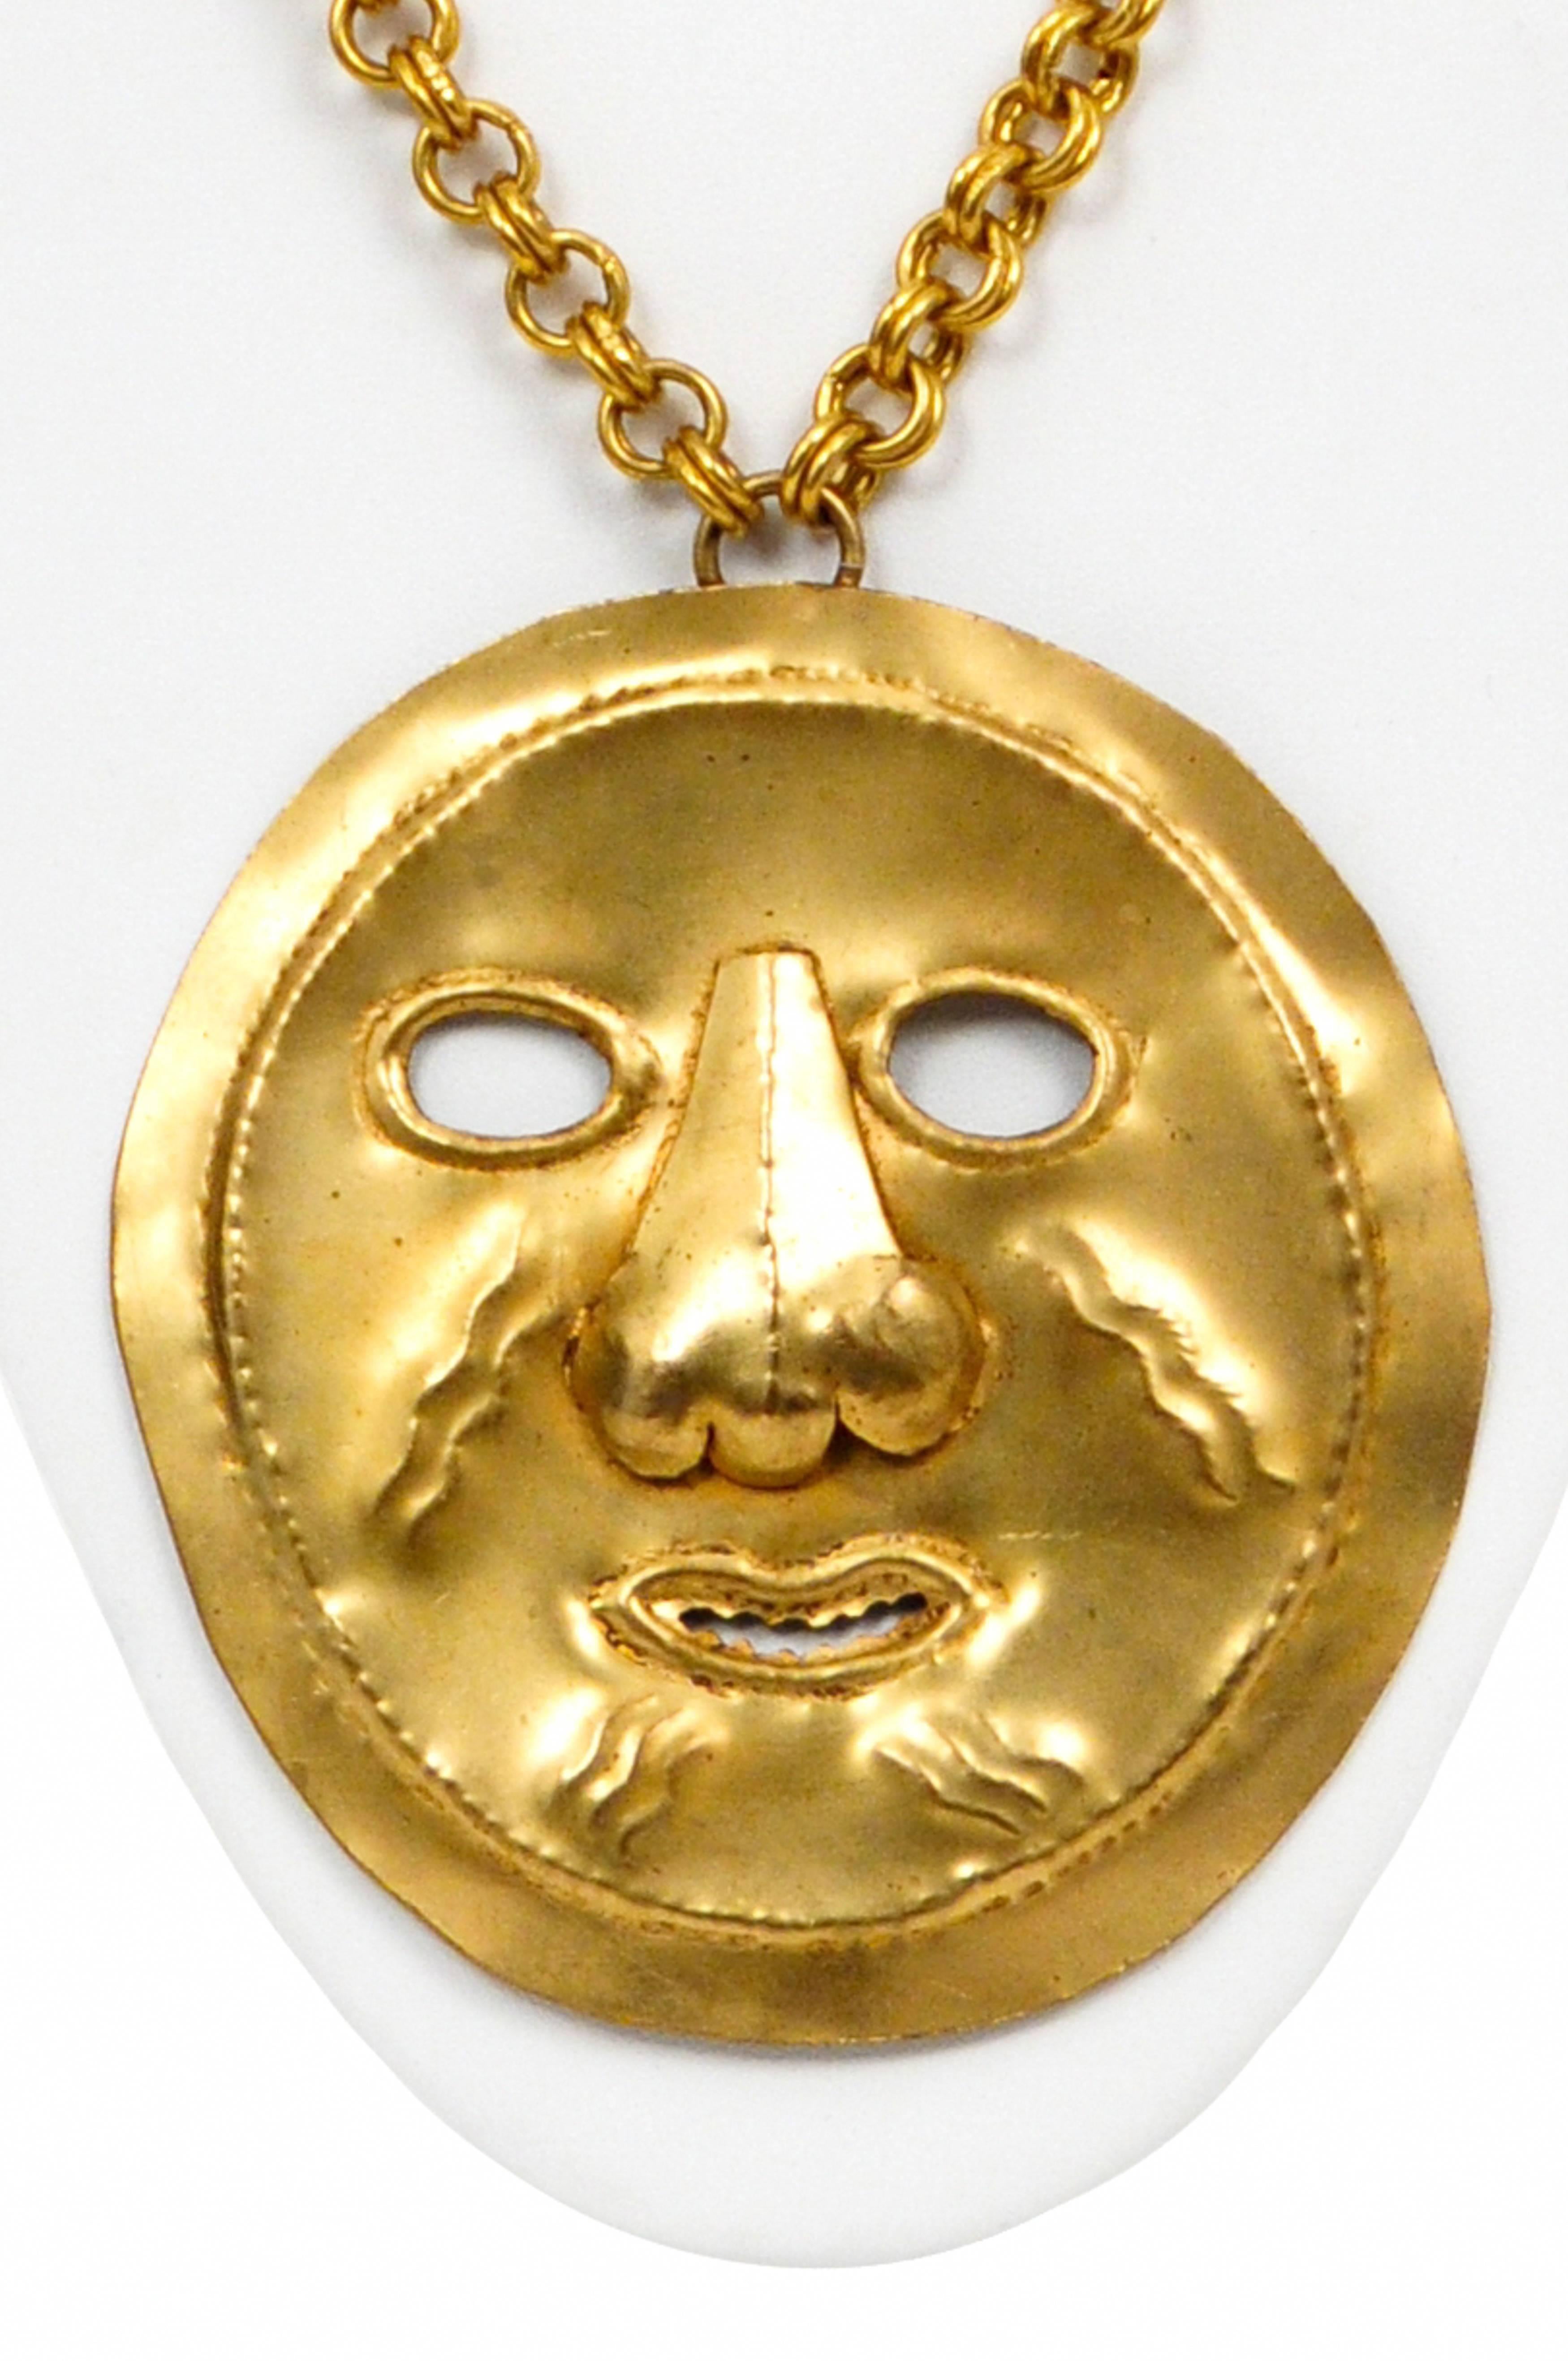 Vintage Yves Saint Laurent gold tone metal necklace featuring a large gold tone hammered metal mask pendant mirroring traditional Peruvian burial masks that hangs from a heavy gold tone chain. Extremely rare and the pendant appears to be hand